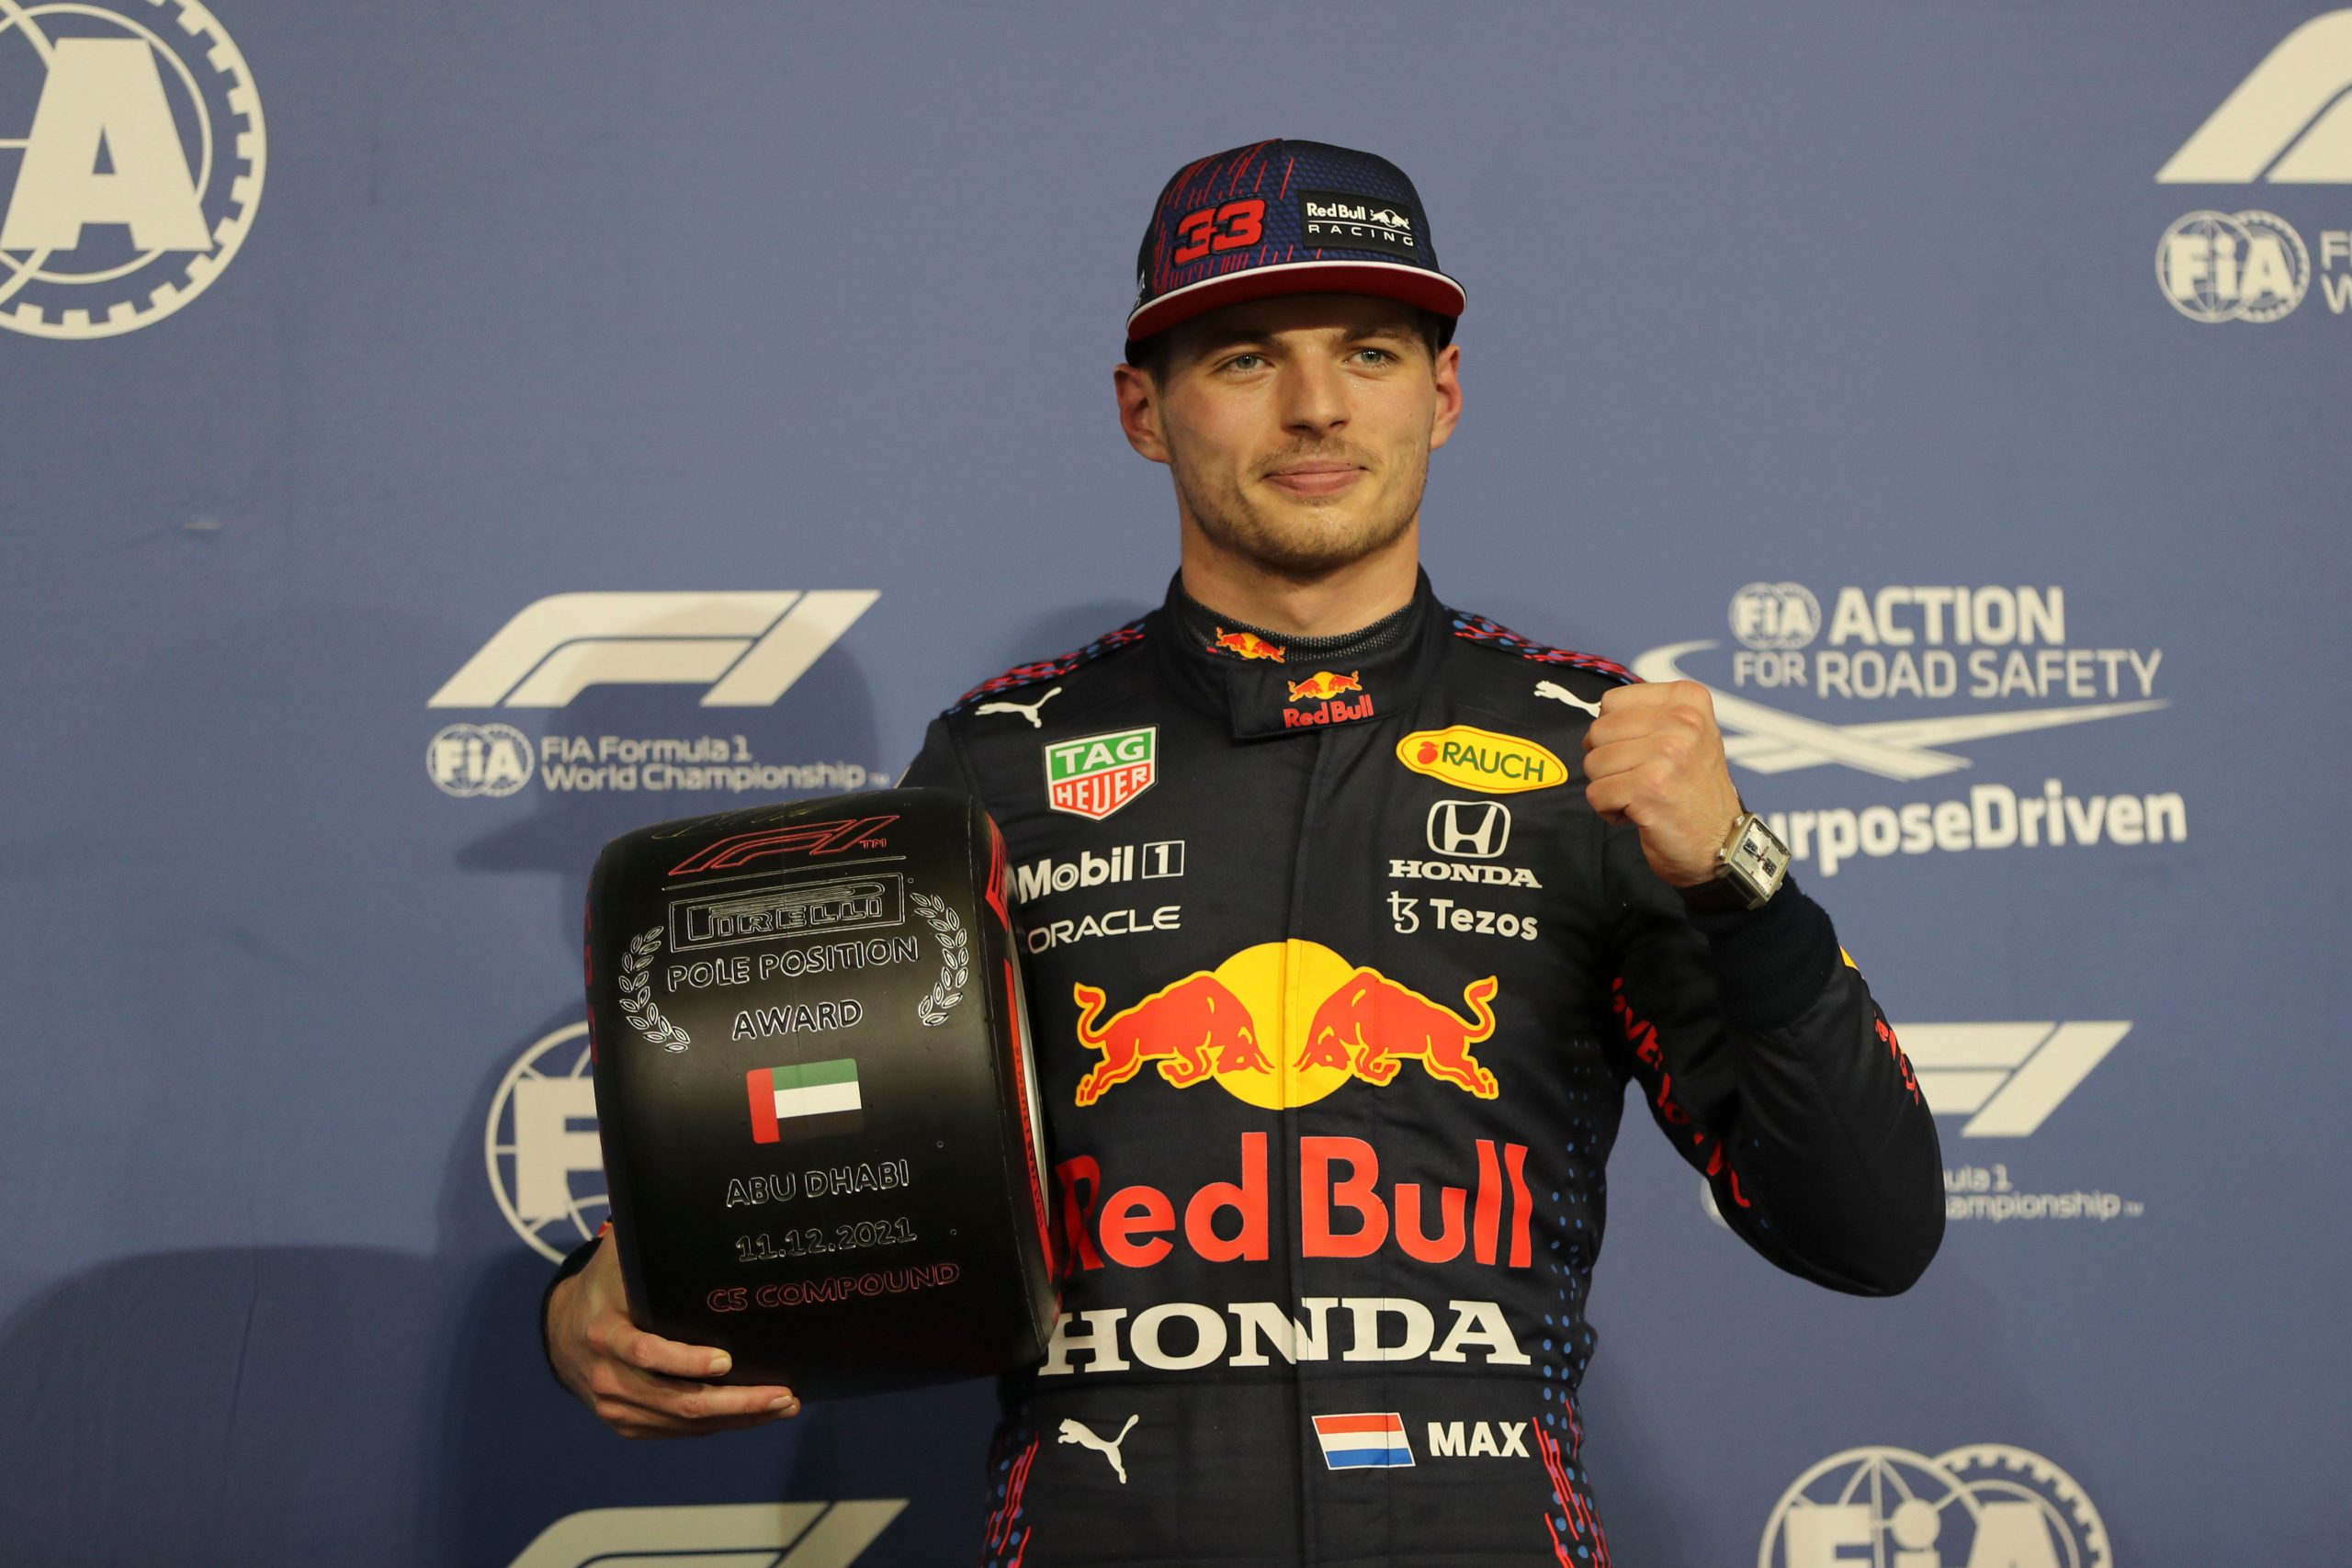 Mercedes lodge formal protest against Max Verstappen’s F1 victory